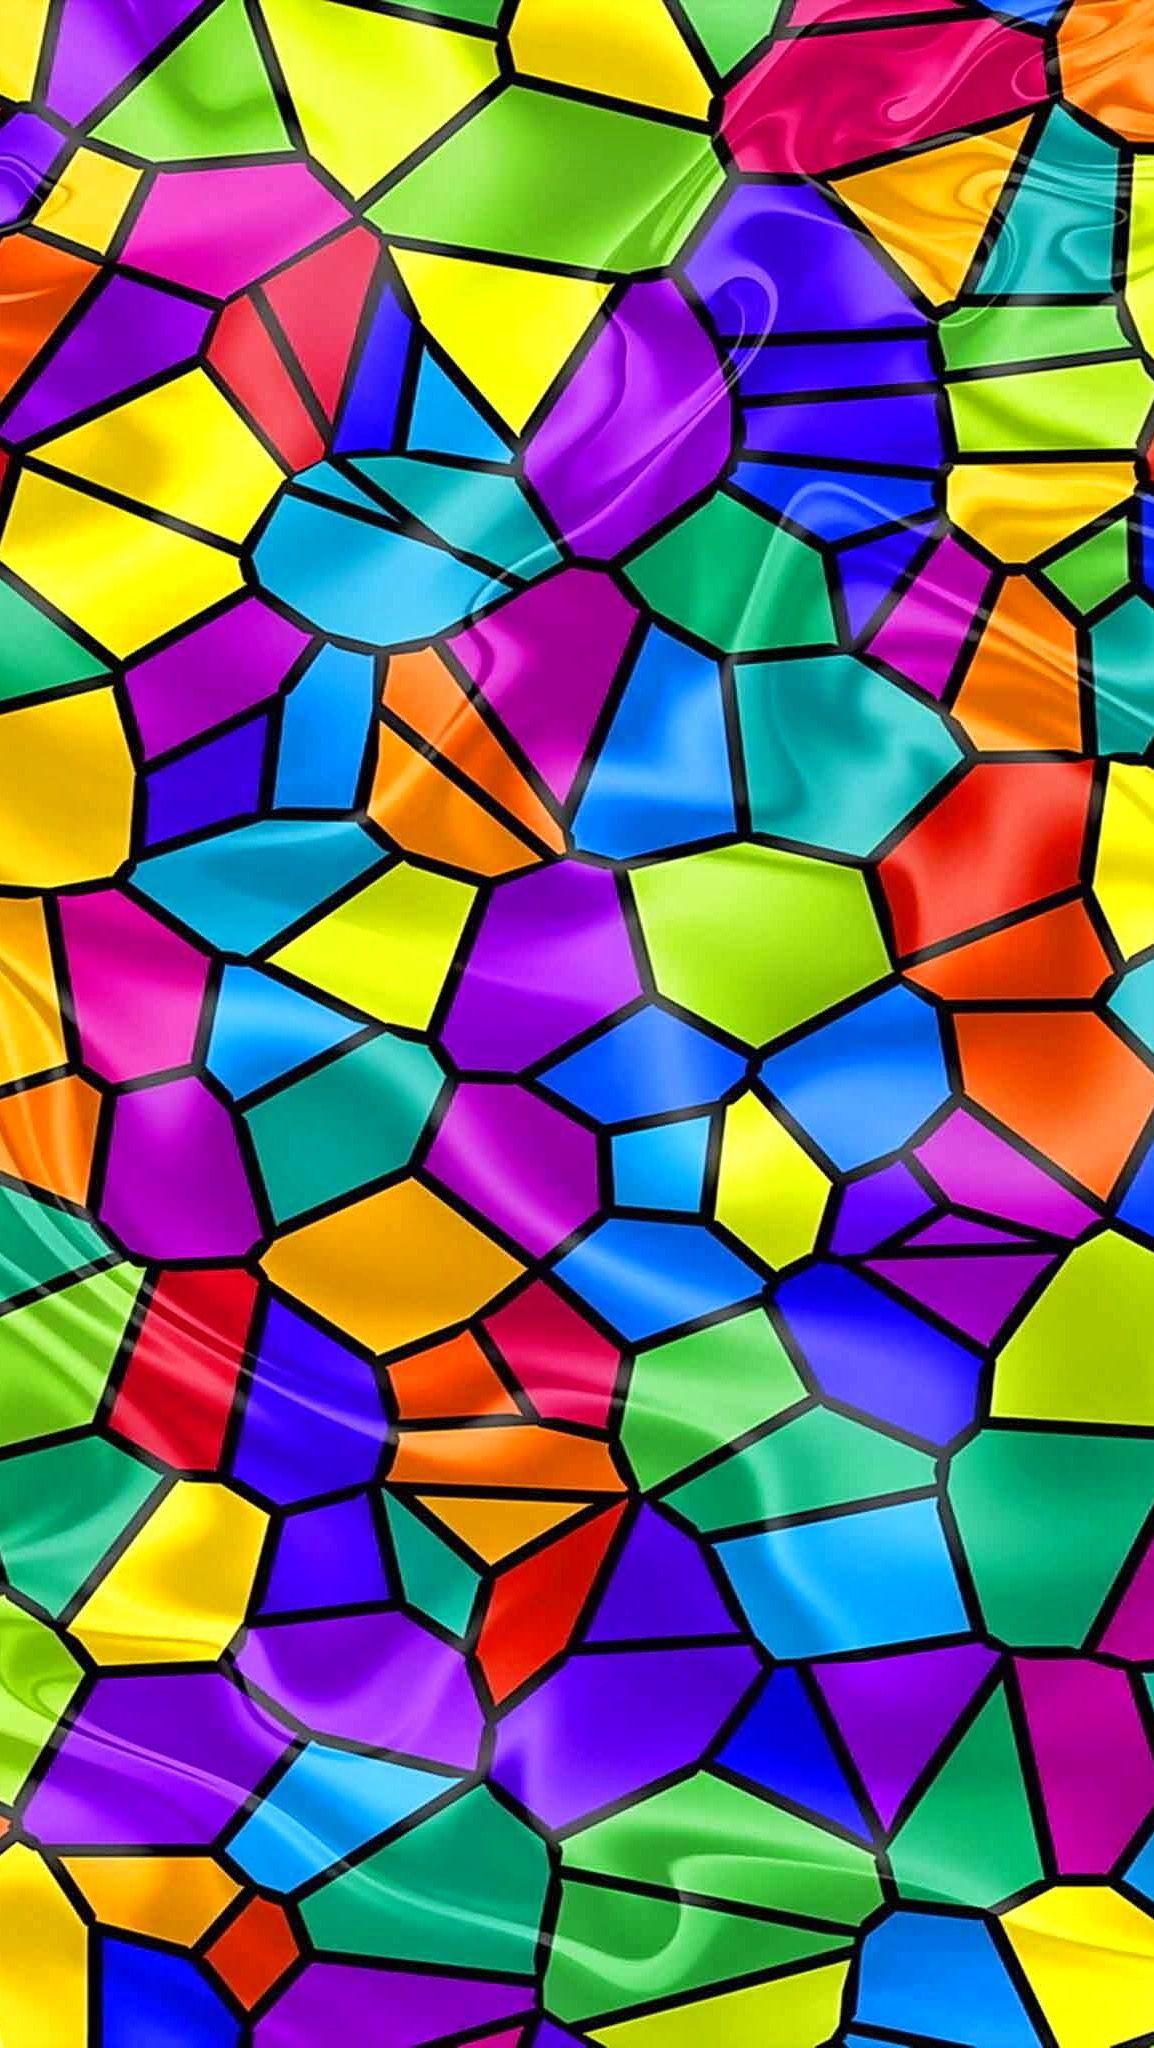 Download Stained Glass wallpapers for mobile phone free Stained Glass  HD pictures